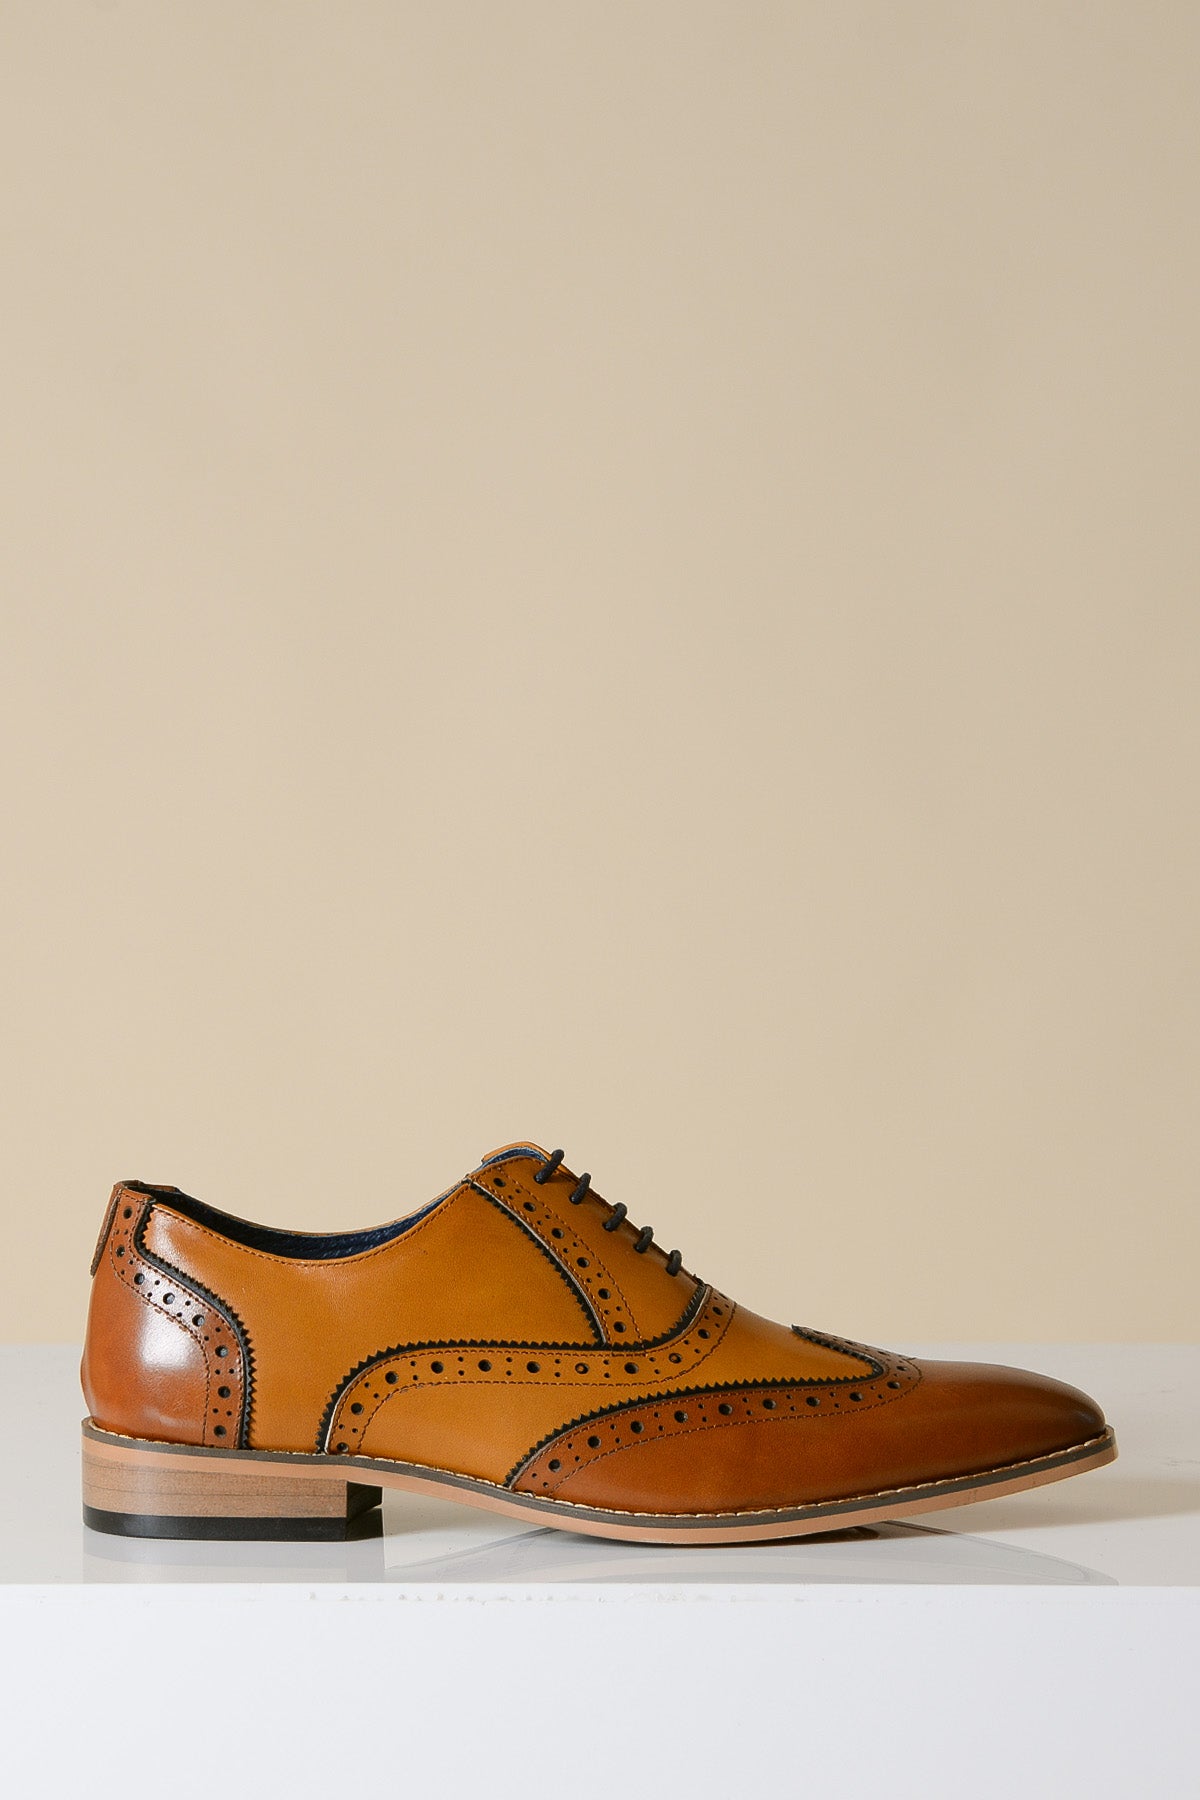 MARCO - Tan Leather Oxford Wingtip Shoe